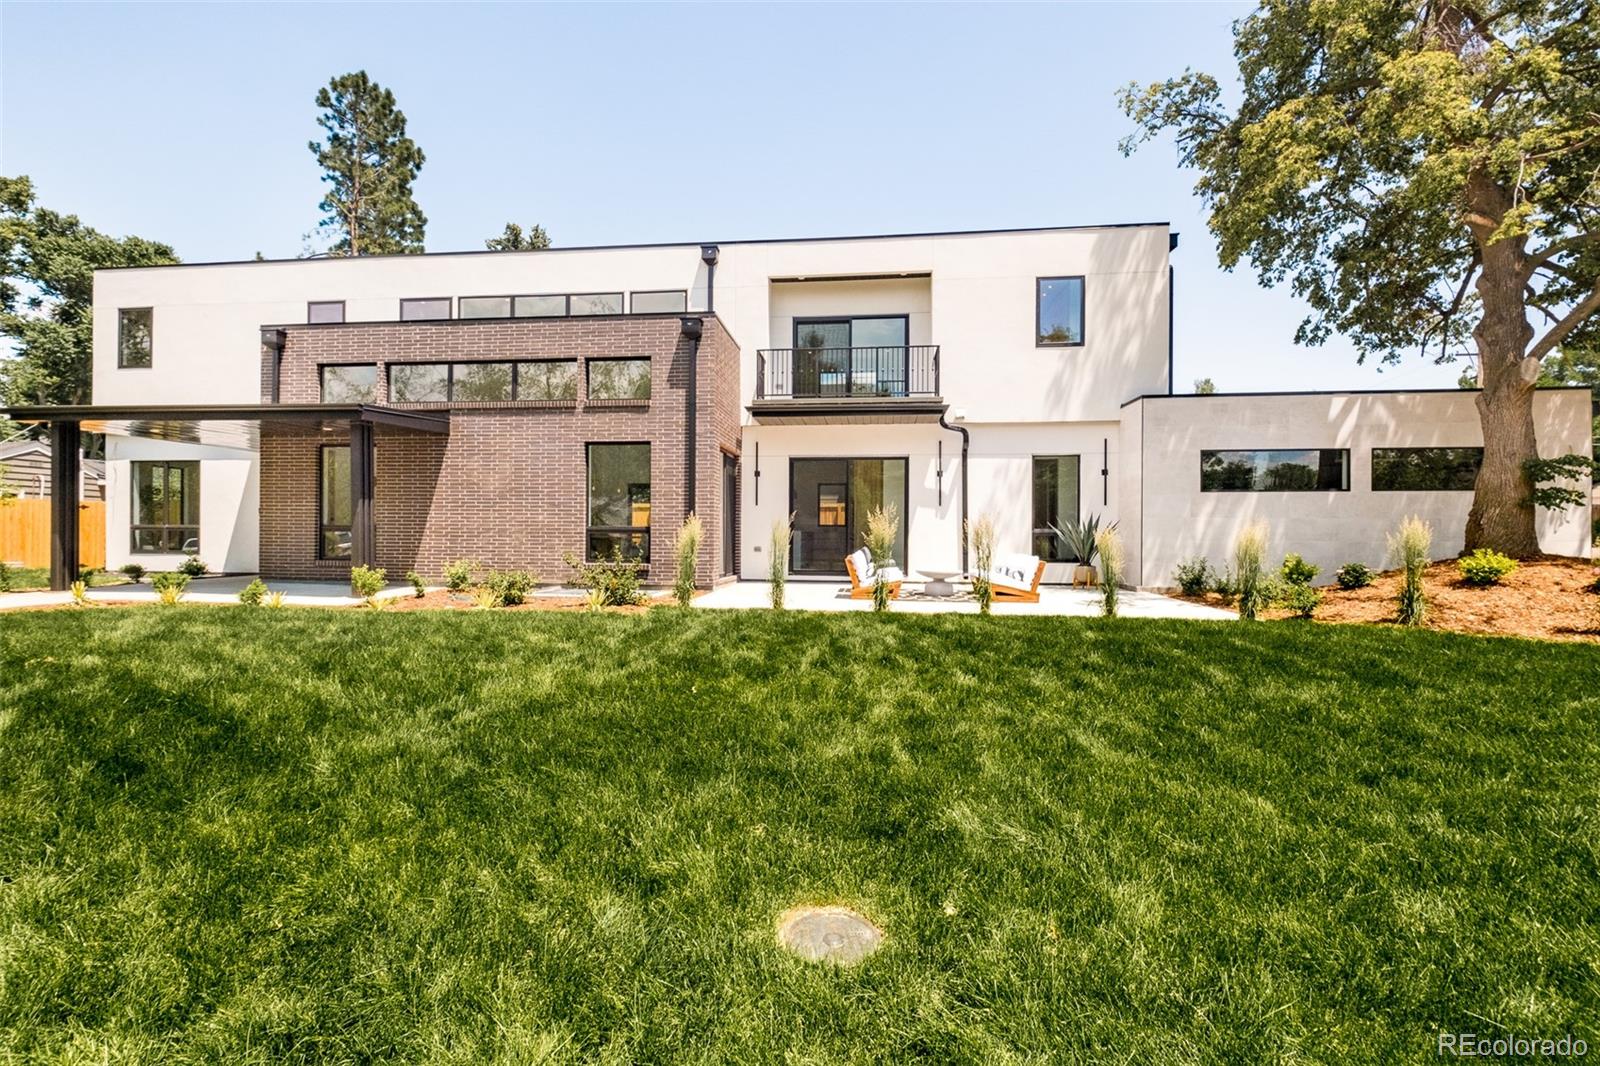 2780 s williams street, Denver sold home. Closed on 2024-04-26 for $2,370,000.